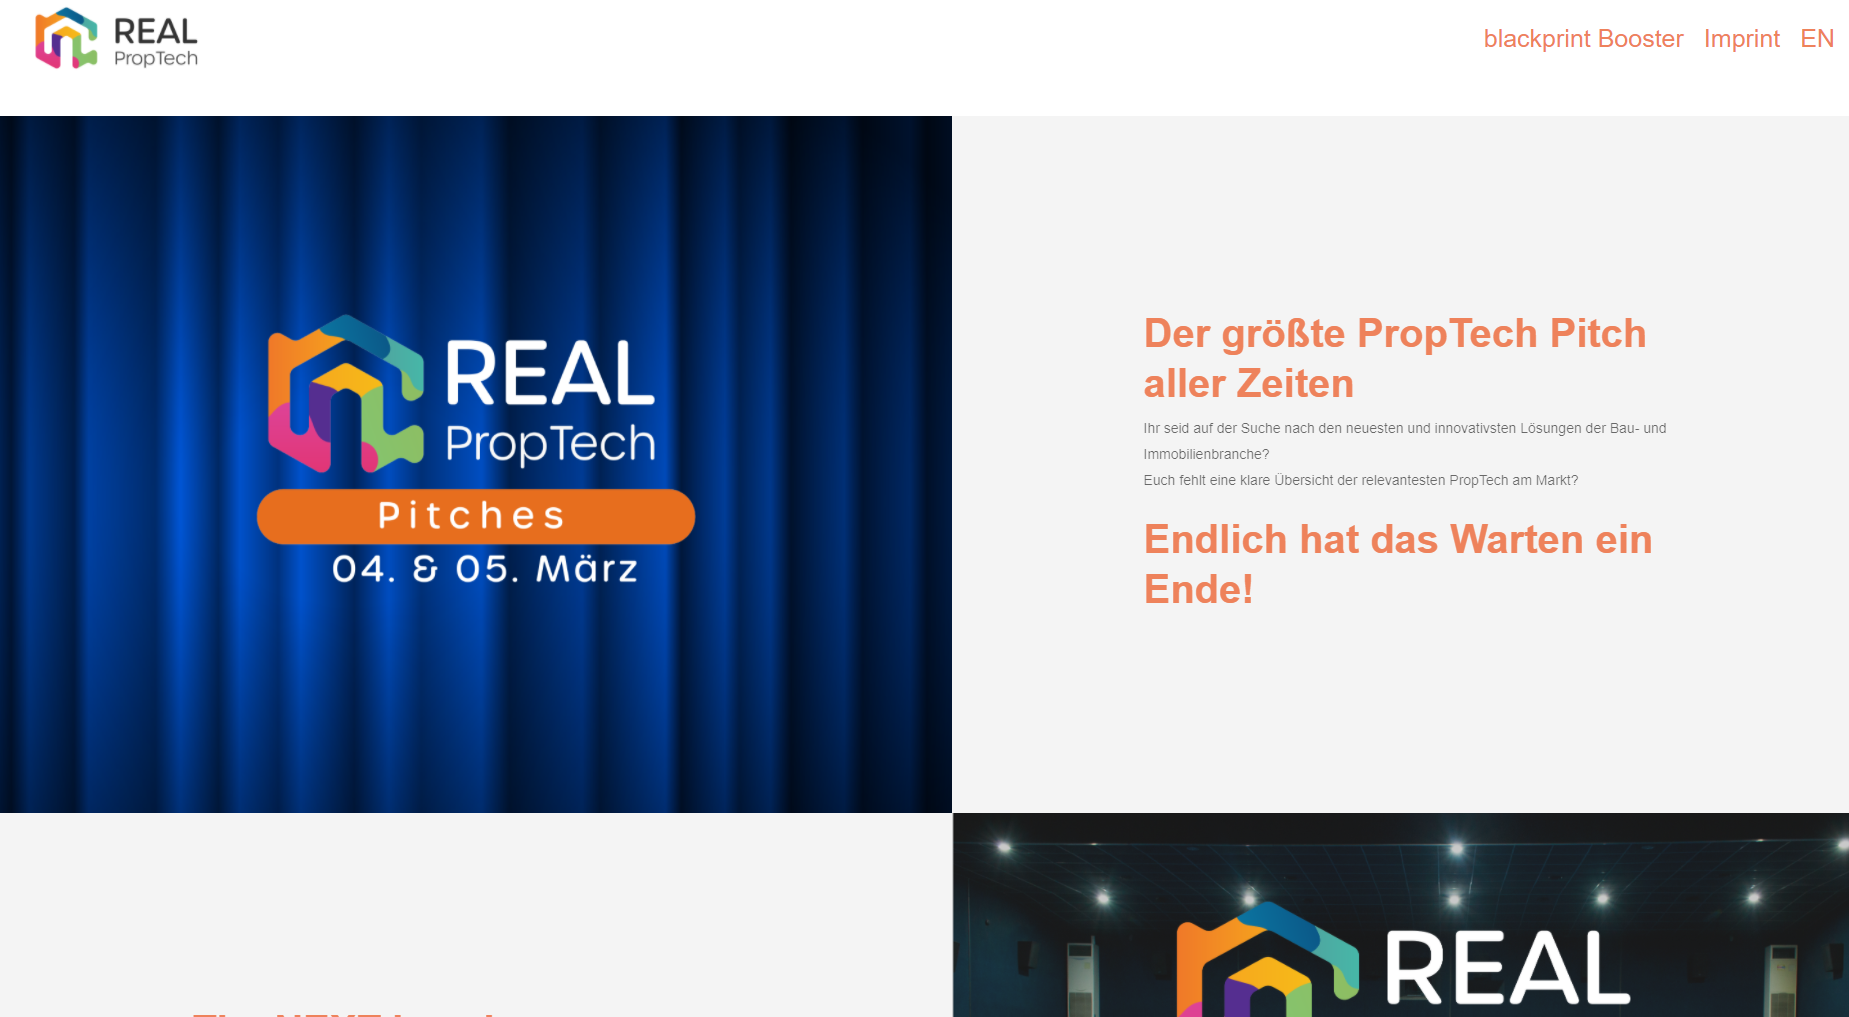 REAL PropTech Pitches